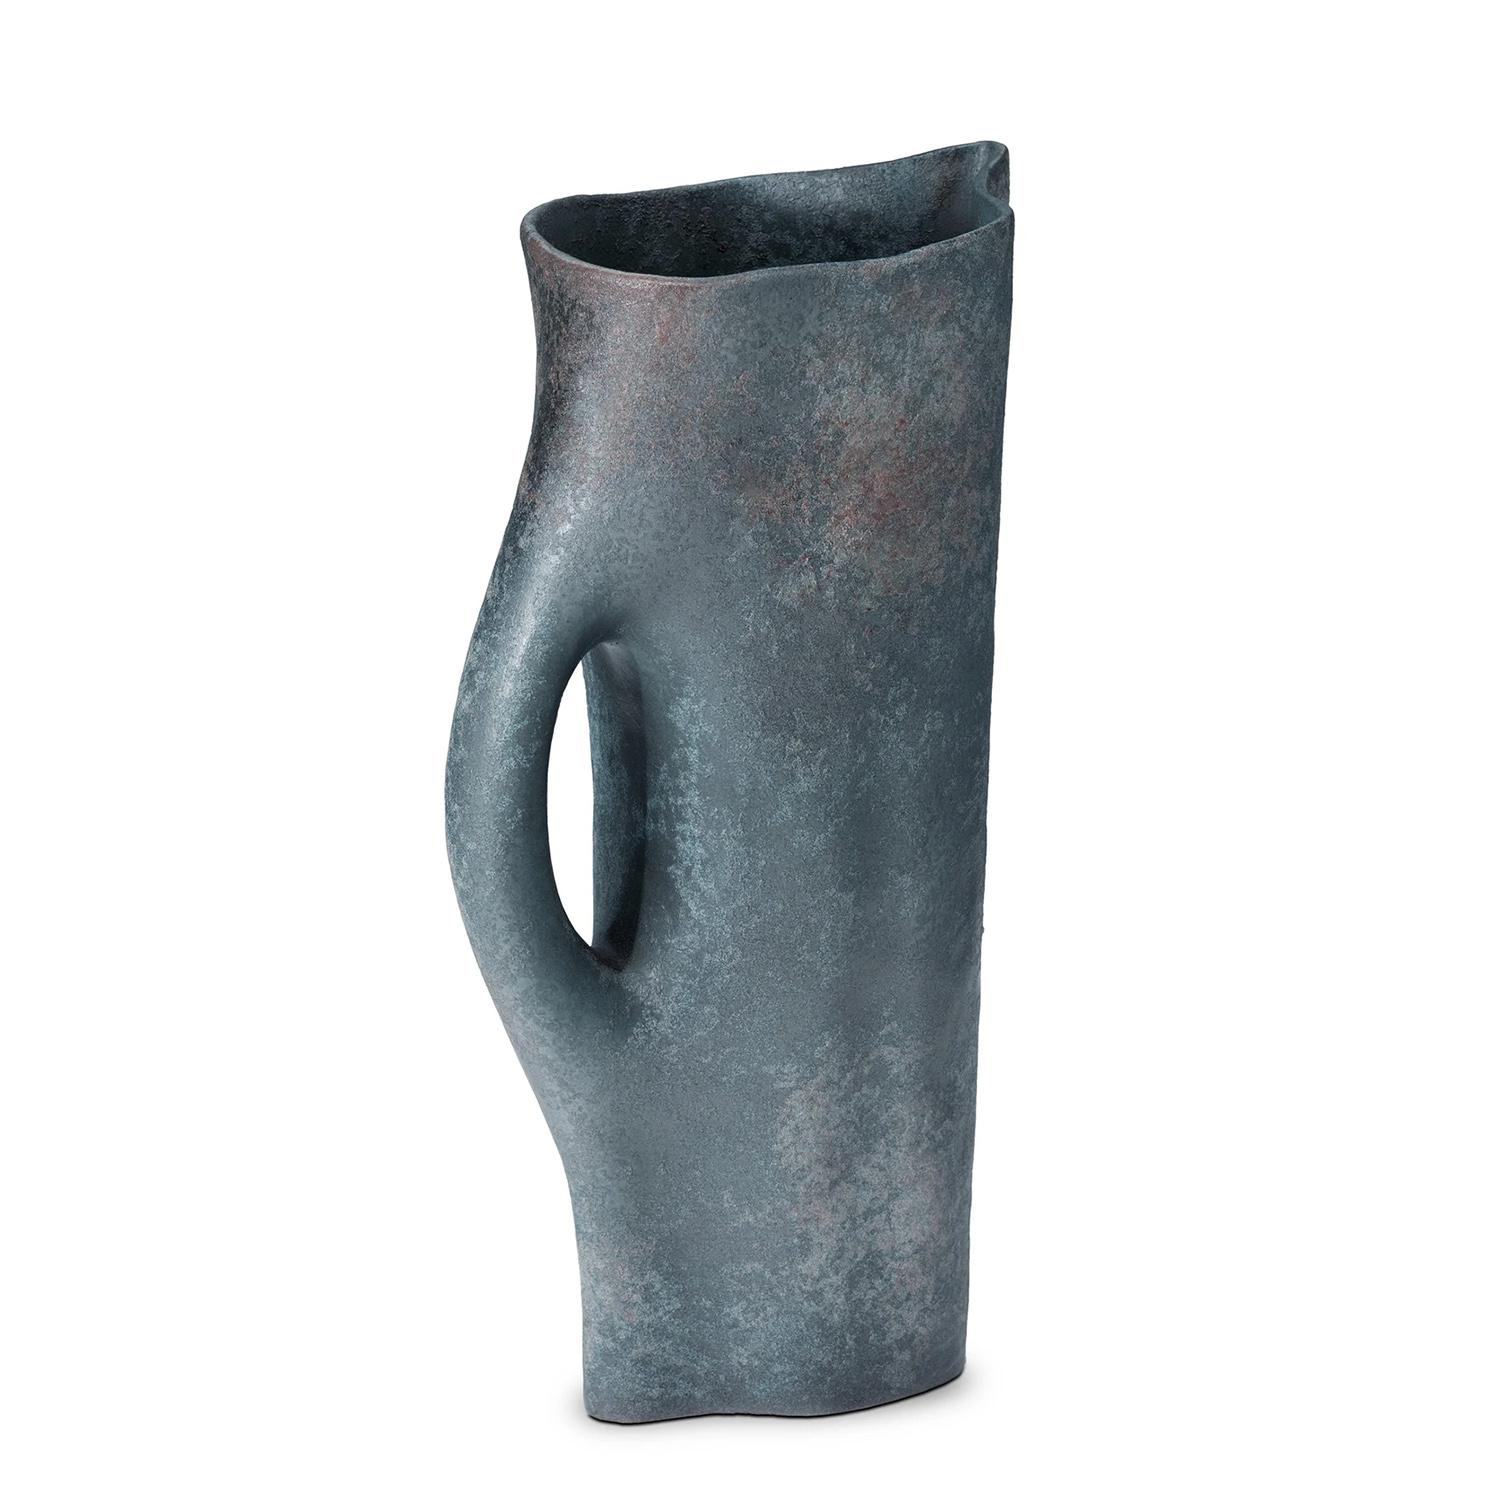 Pitcher Amy all in porcelain, hand-glazed 
and sculpted. Porcelain with a mineral 
finishing. Maximum 2 liters.
 